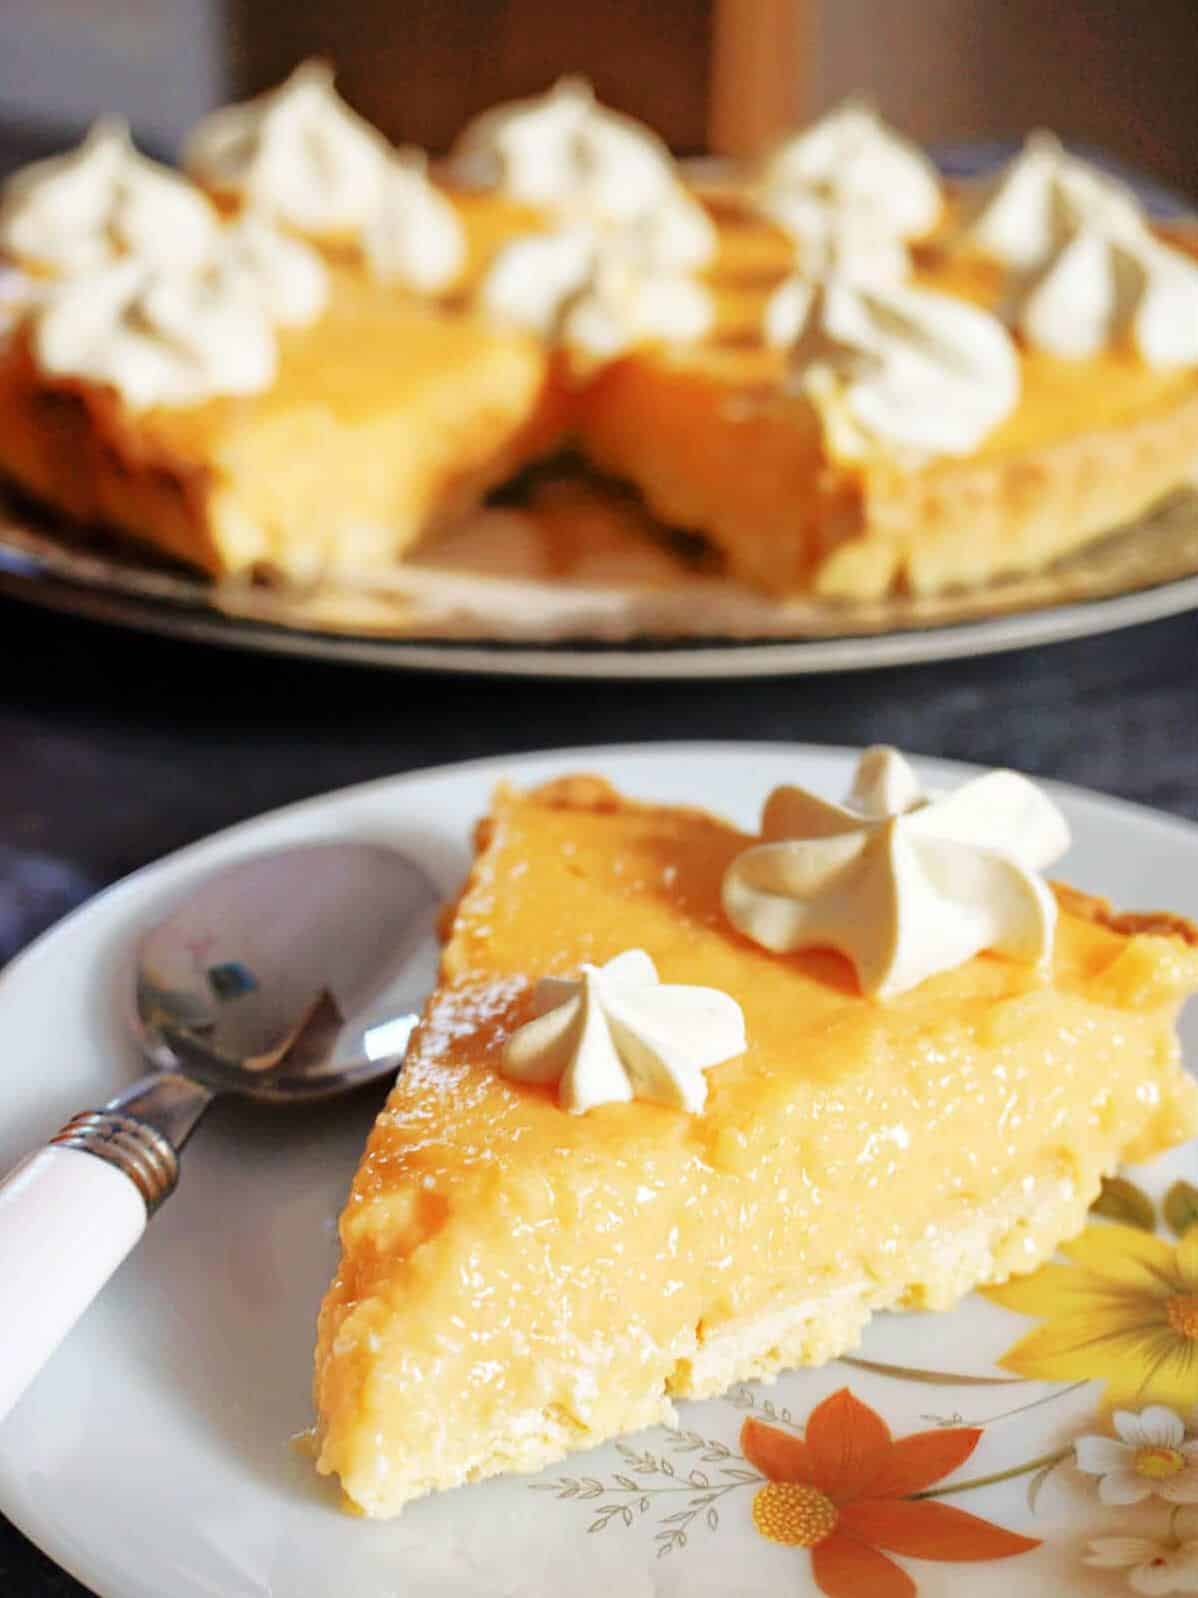  Juicy slices of cantaloupe piled high and ready to be transformed into a sweet summer dessert!